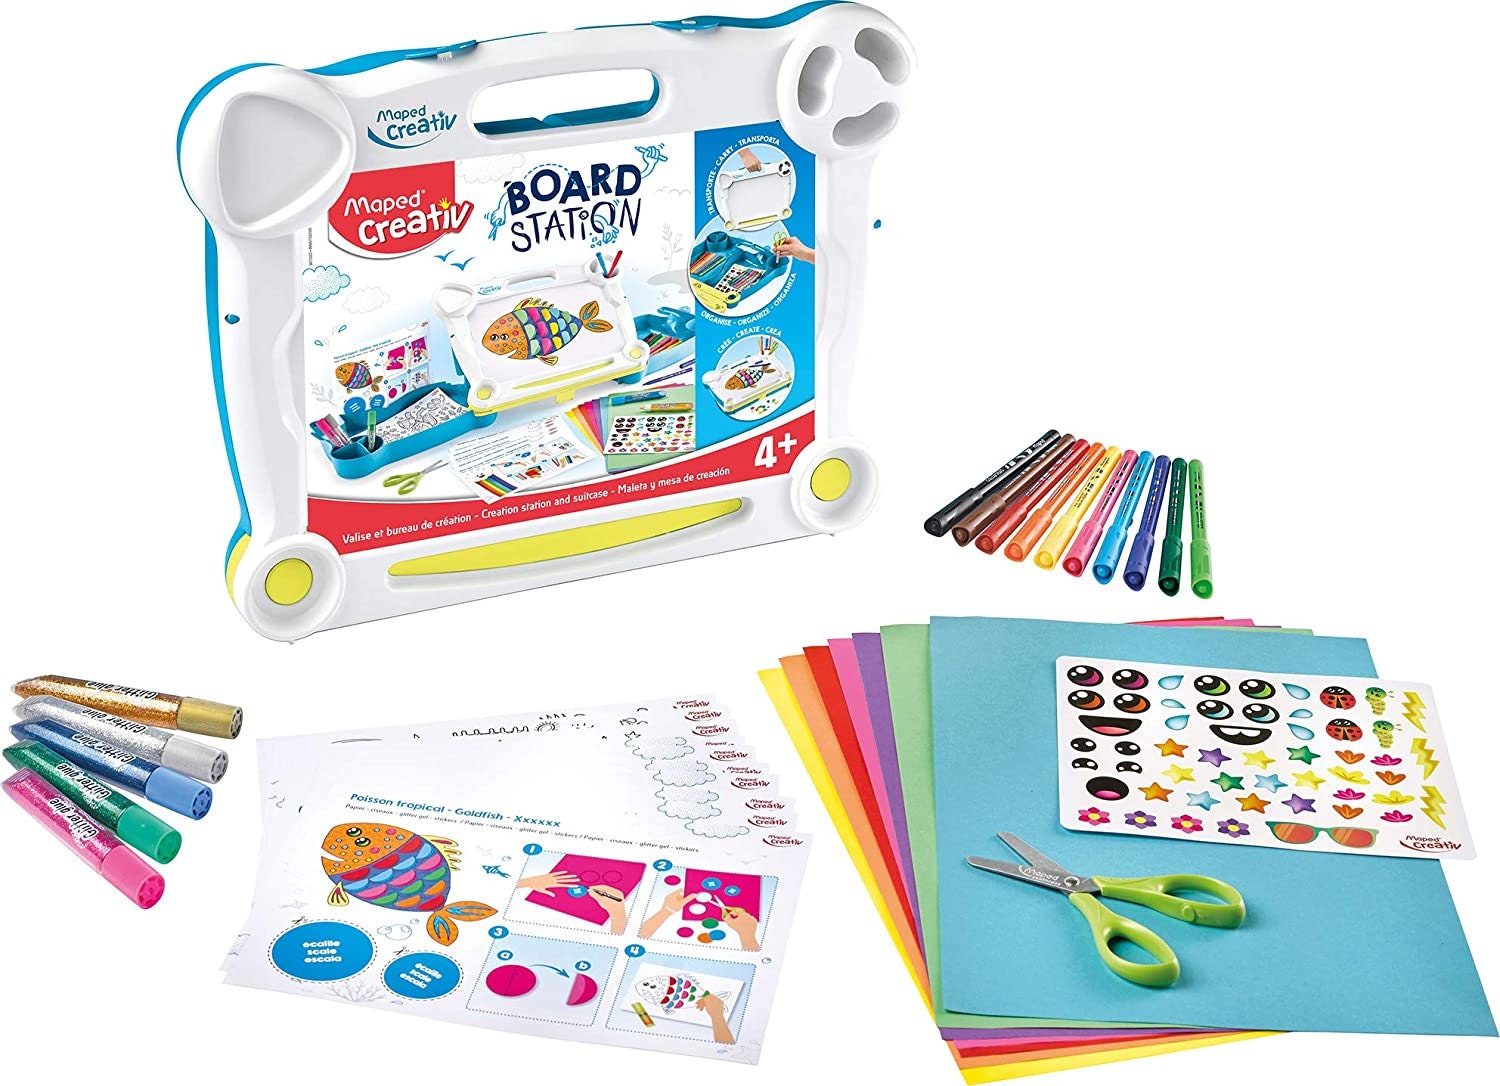 Maped Creativ Lumi Board (1 stores) see prices now »